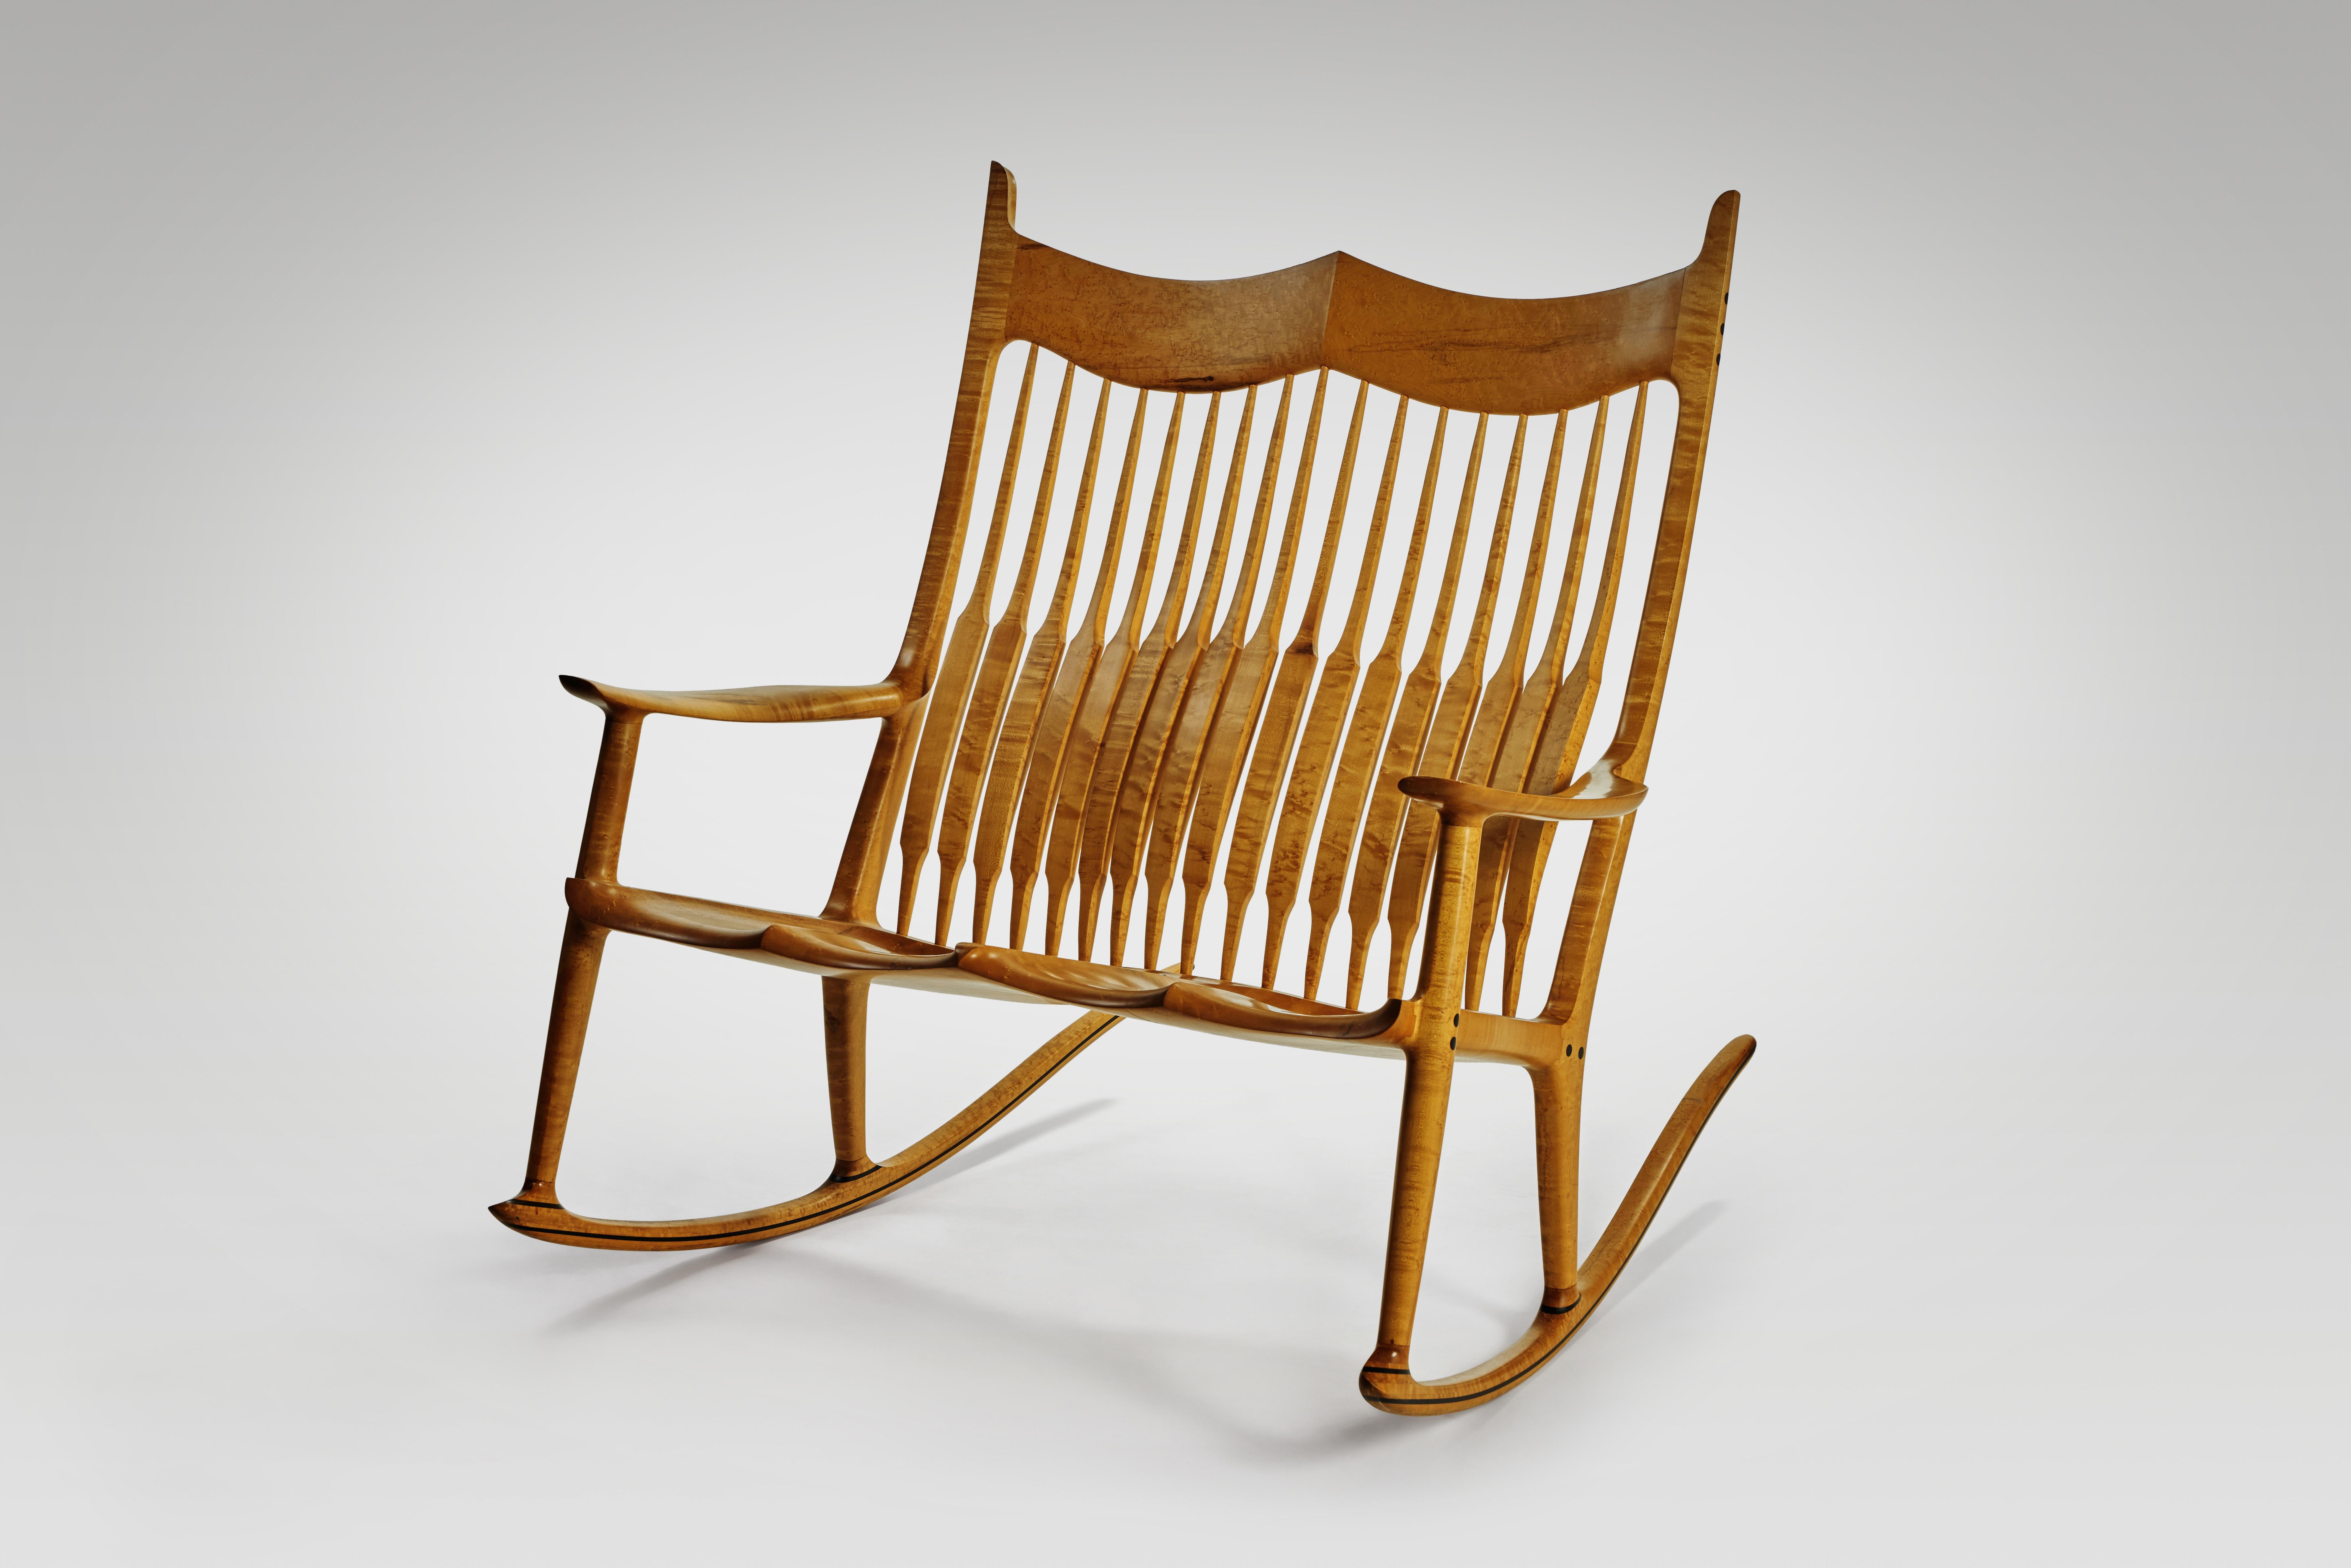 Double rocking chair by Sam Maloof, circa 1980's
signed Sam Maloof f.A.C.C./©, dated 1988 and numbered No. 9.

Literature
Jo Lauria, Craft in America: Celebrating Two Centuries of Artists and Objects, New York, 2007, p. 101 (for a related